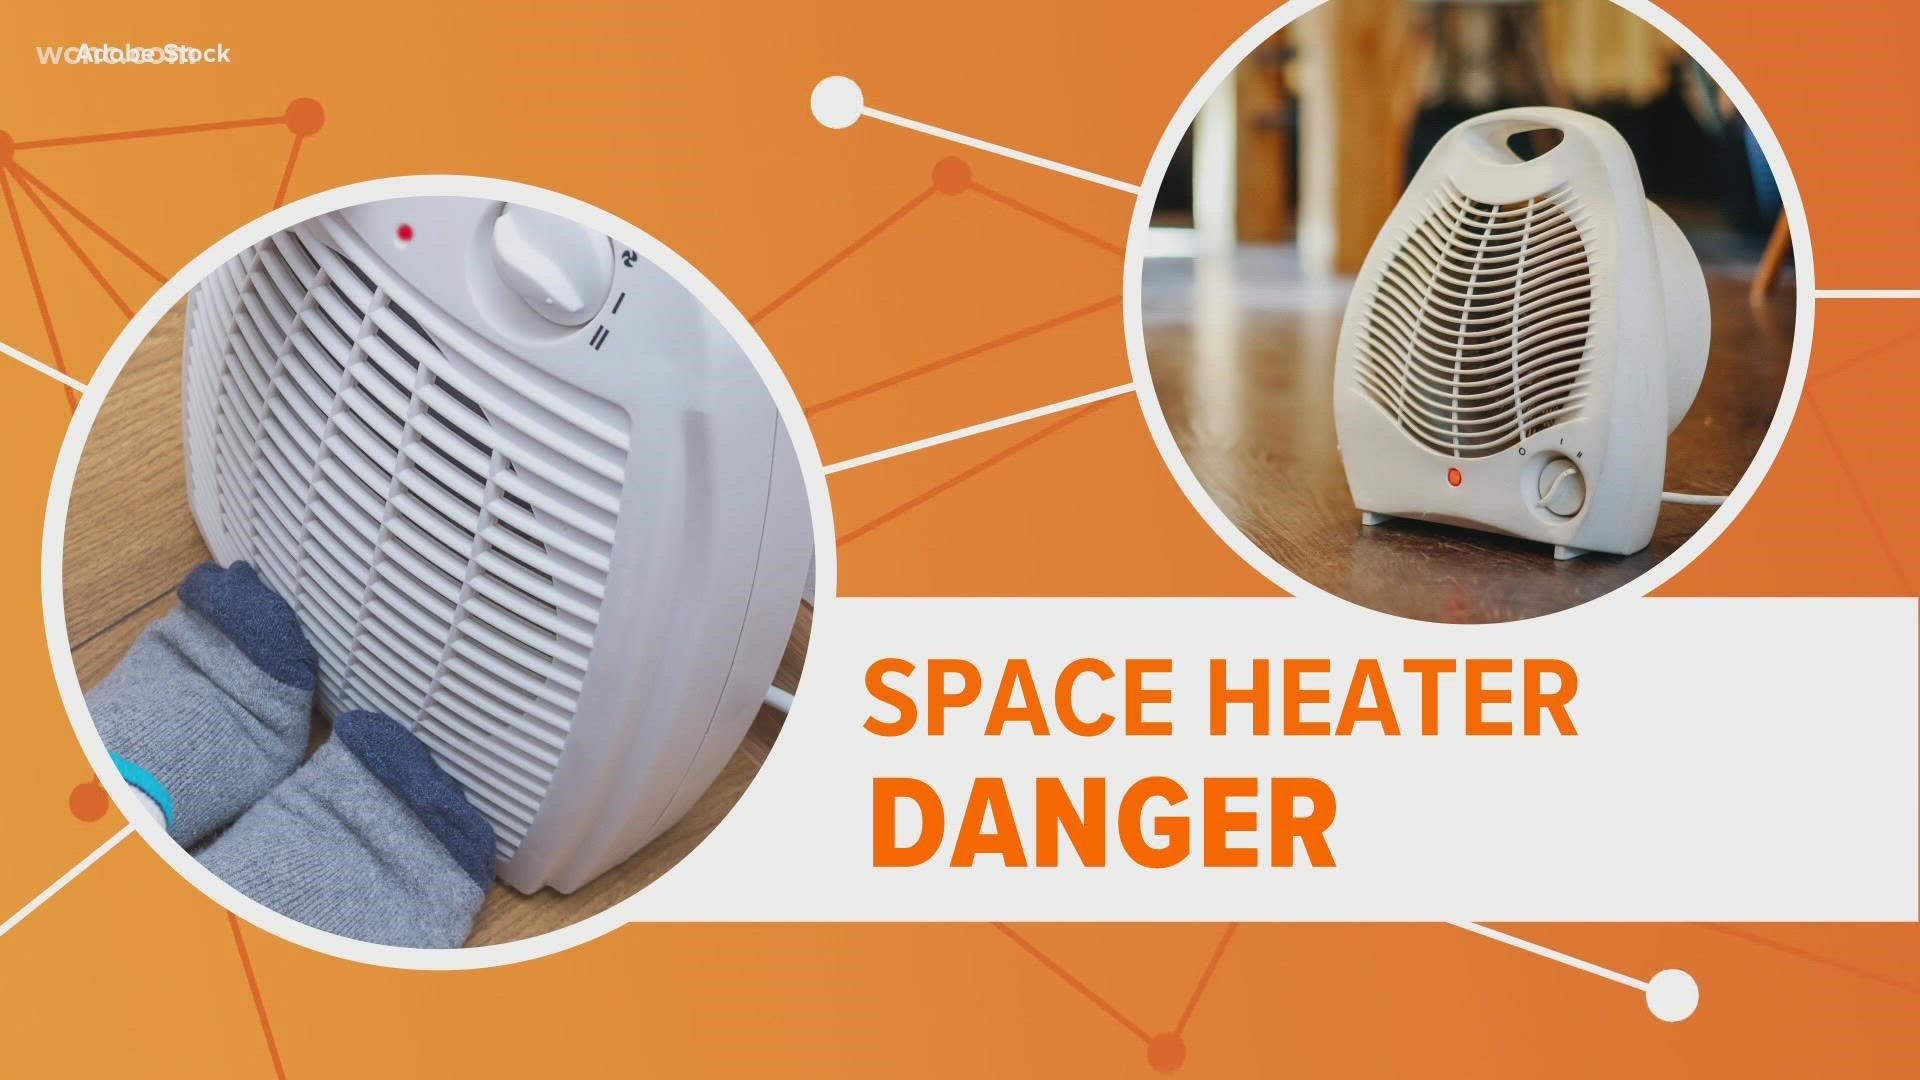 With winter weather on the way, you may be looking for some extra ways to keep warm, like a space heater. They're convenient, but they do come with some risks.